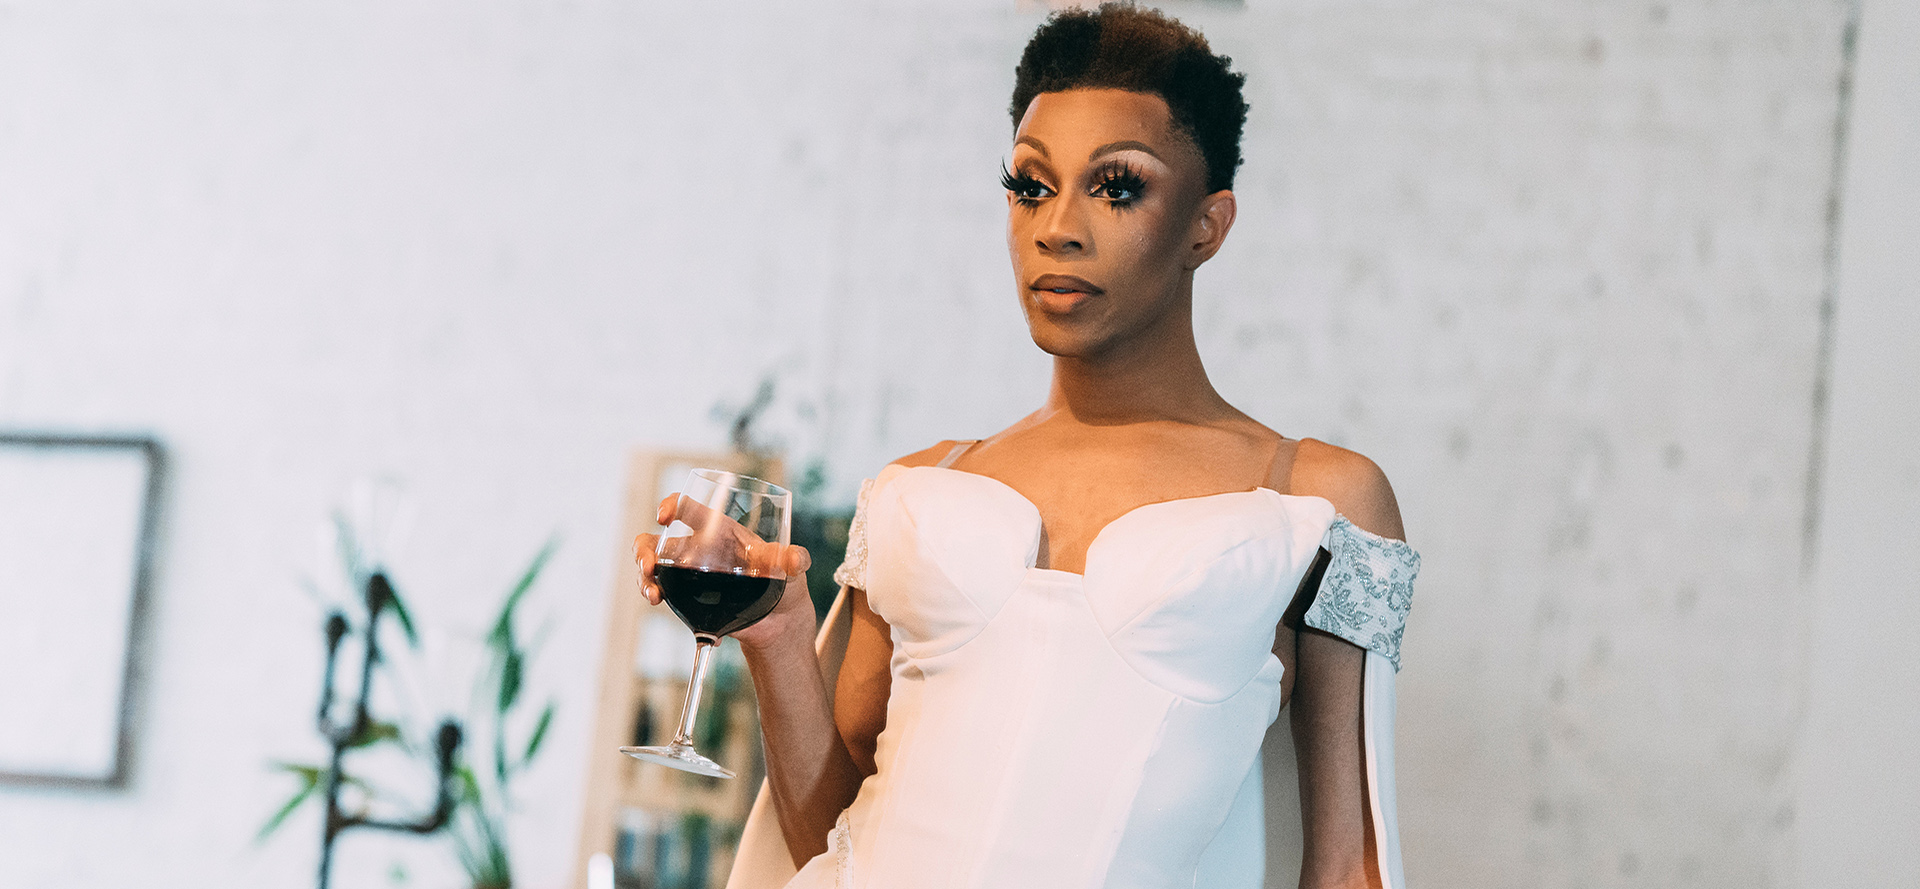 Transgender in a white dress with a glass of wine.